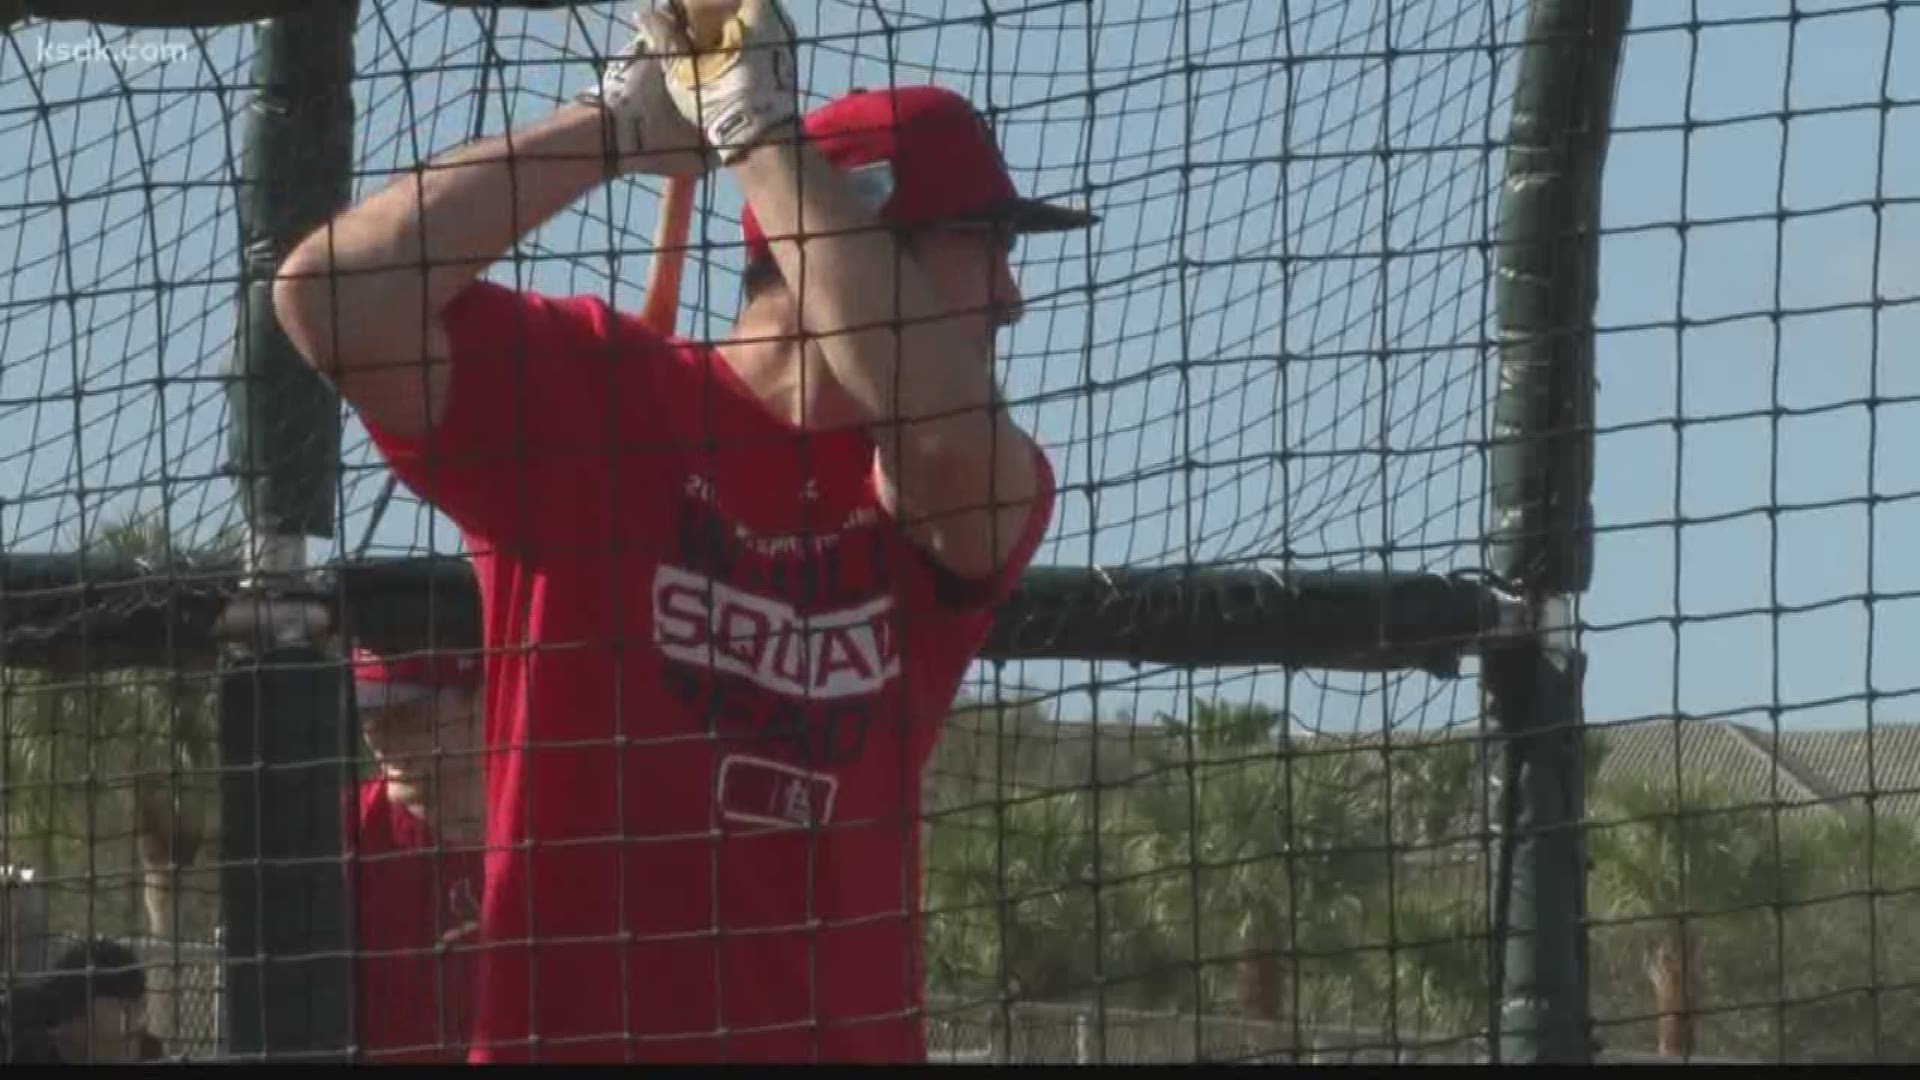 Newest Cardinal Paul Goldschmidt is attracting a lot of attention down in Jupiter.